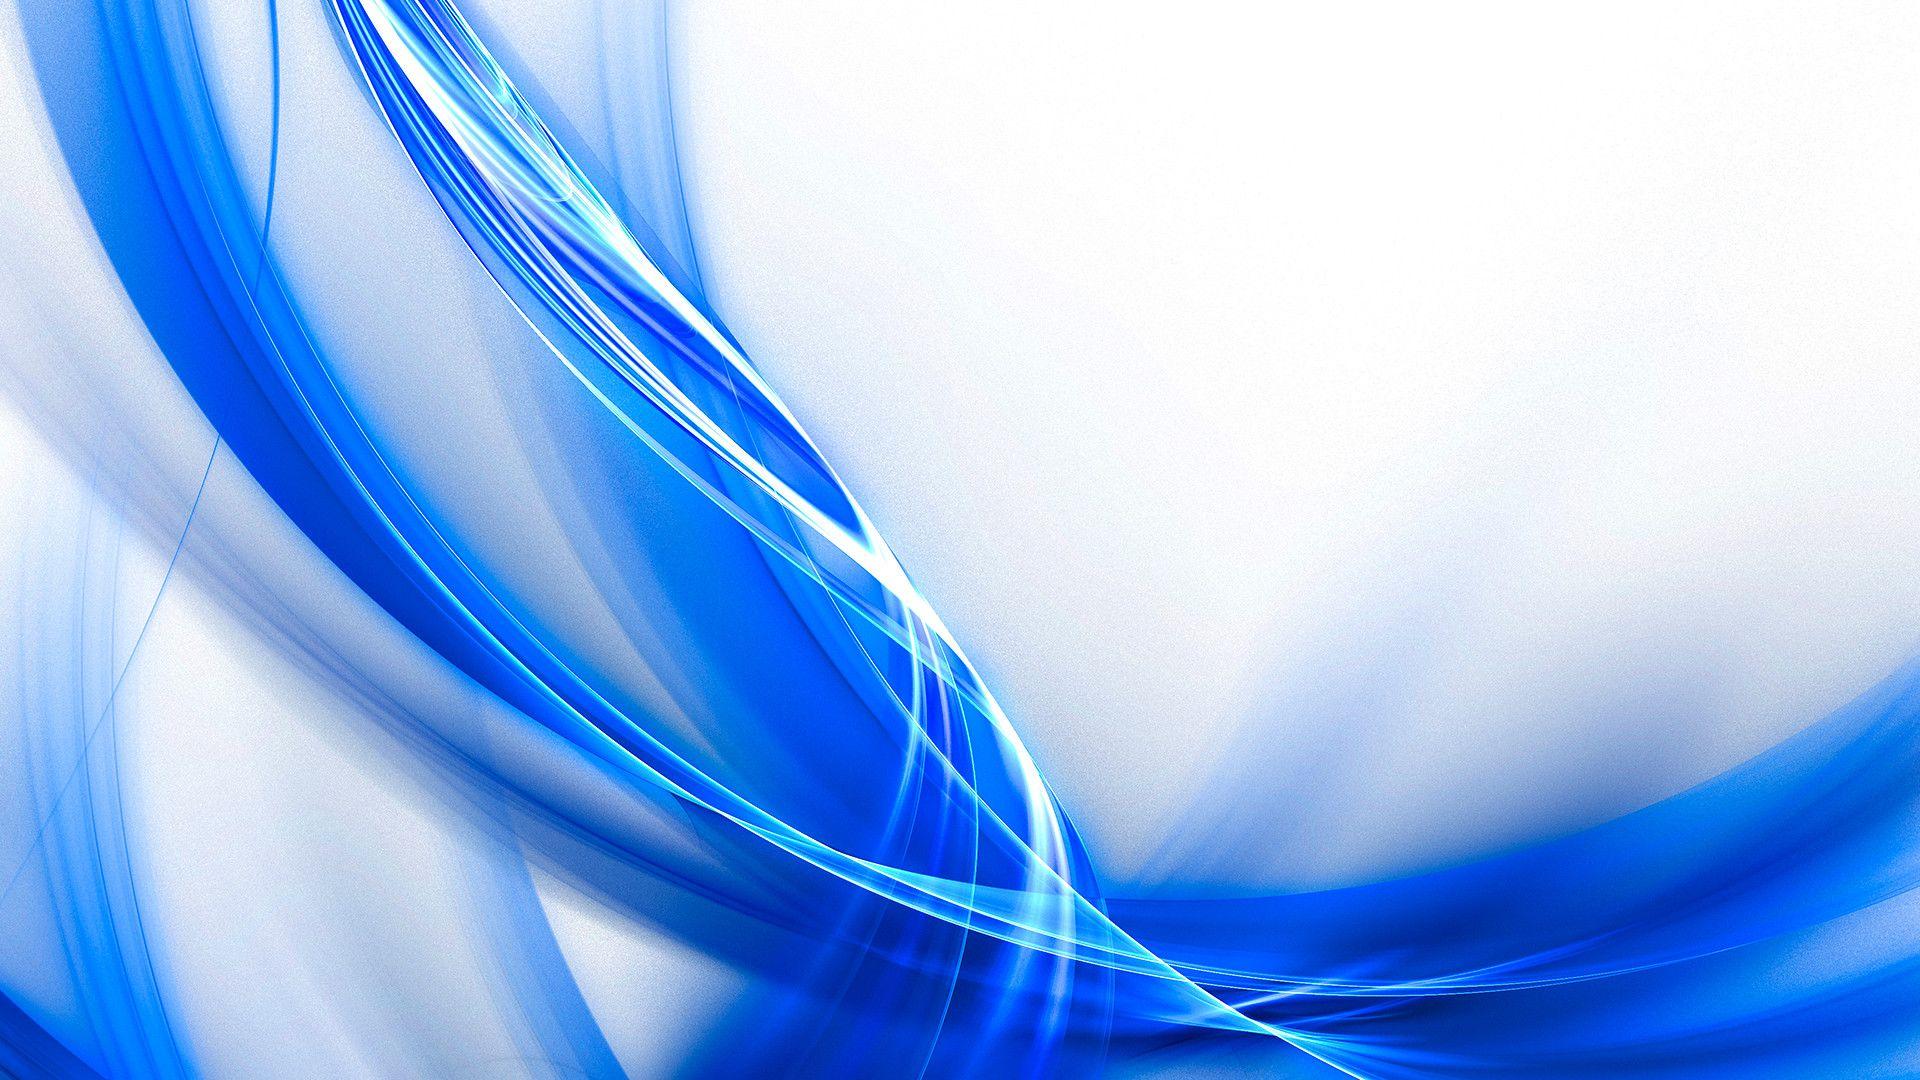 Blue Background Images  Free iPhone  Zoom HD Wallpapers  Vectors   rawpixel